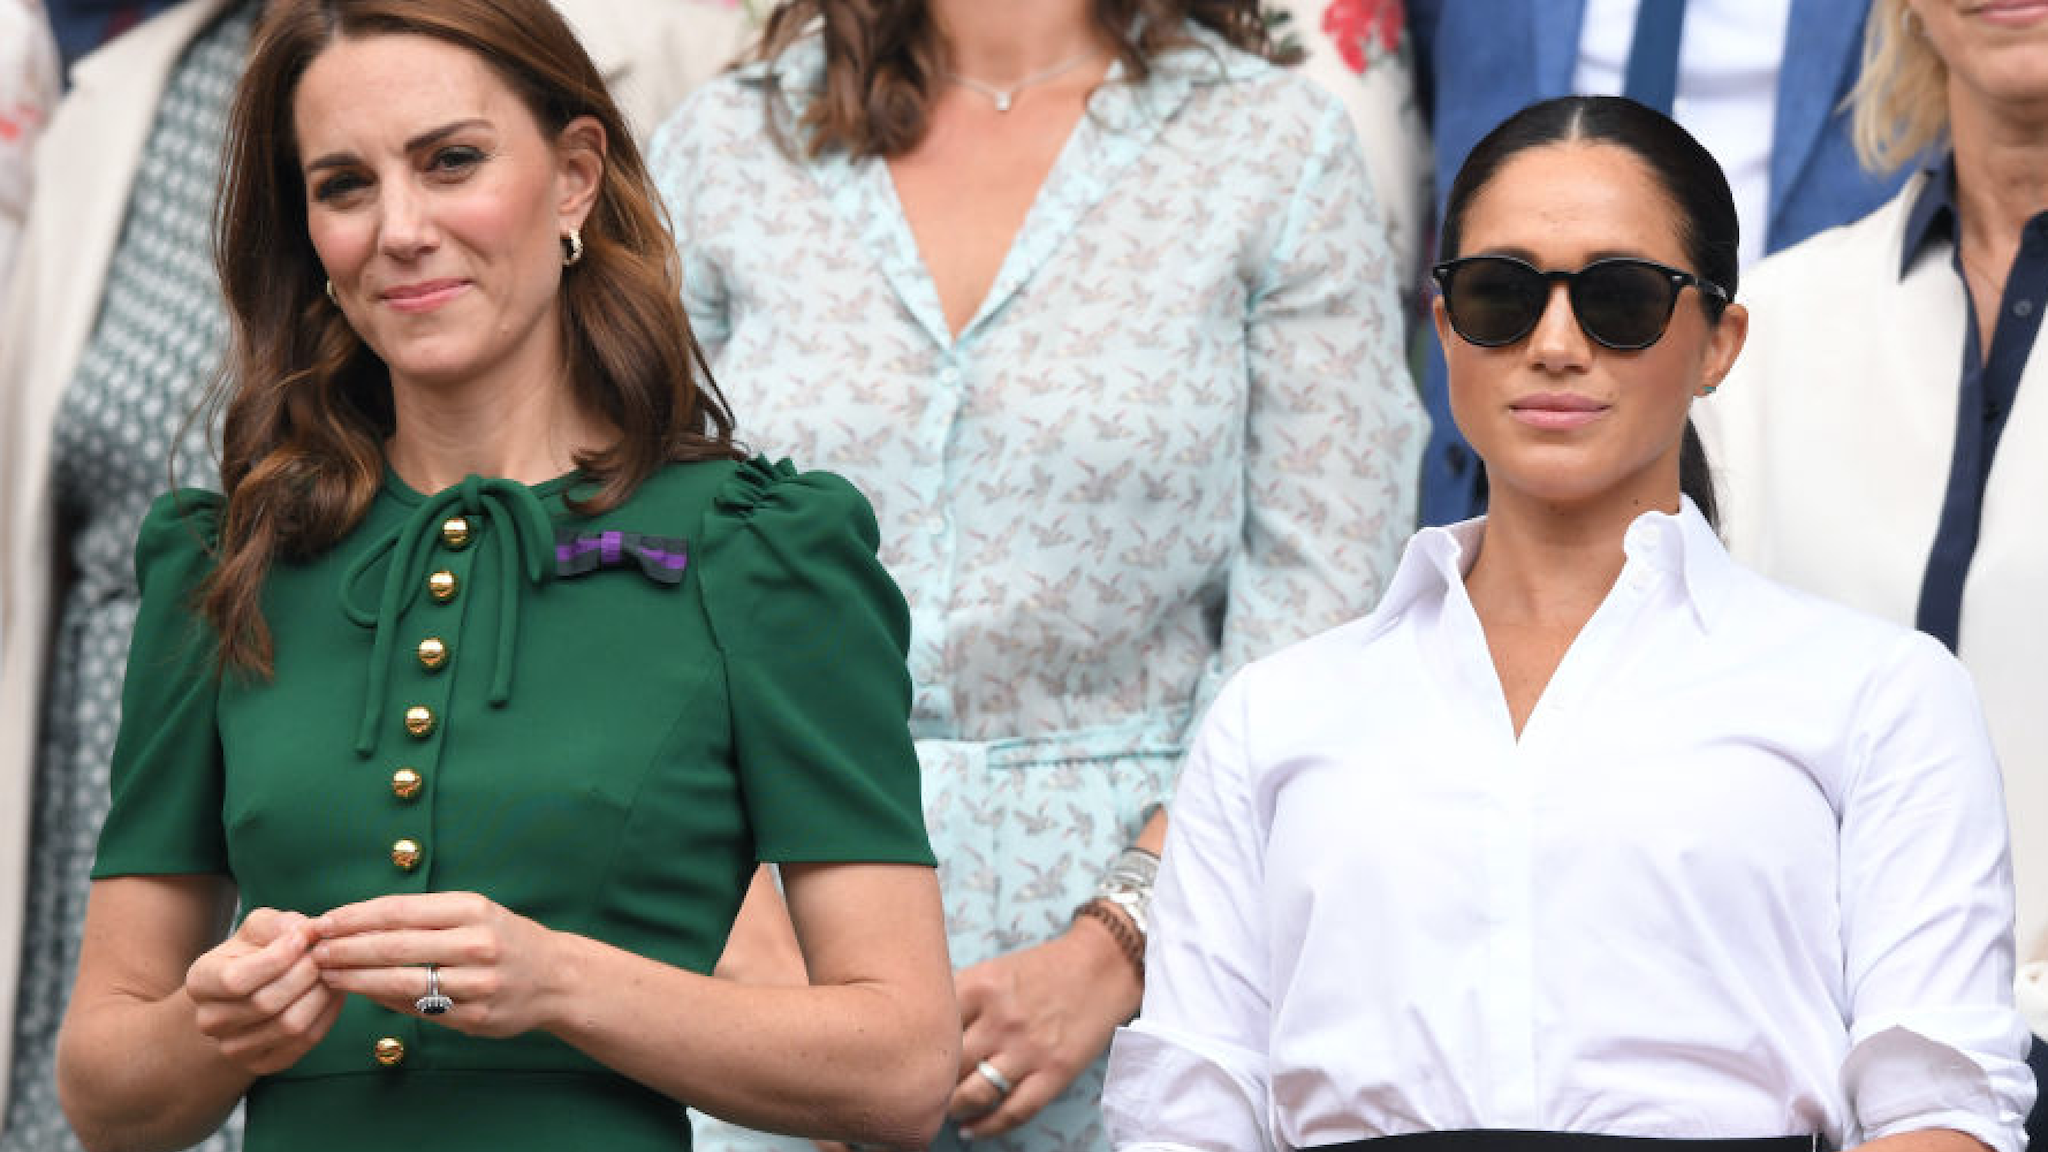 Catherine, Duchess of Cambridge and Meghan, Duchess of Sussex in the Royal Box on Centre Court during day twelve of the Wimbledon Tennis Championships at All England Lawn Tennis and Croquet Club on July 13, 2019 in London, England.